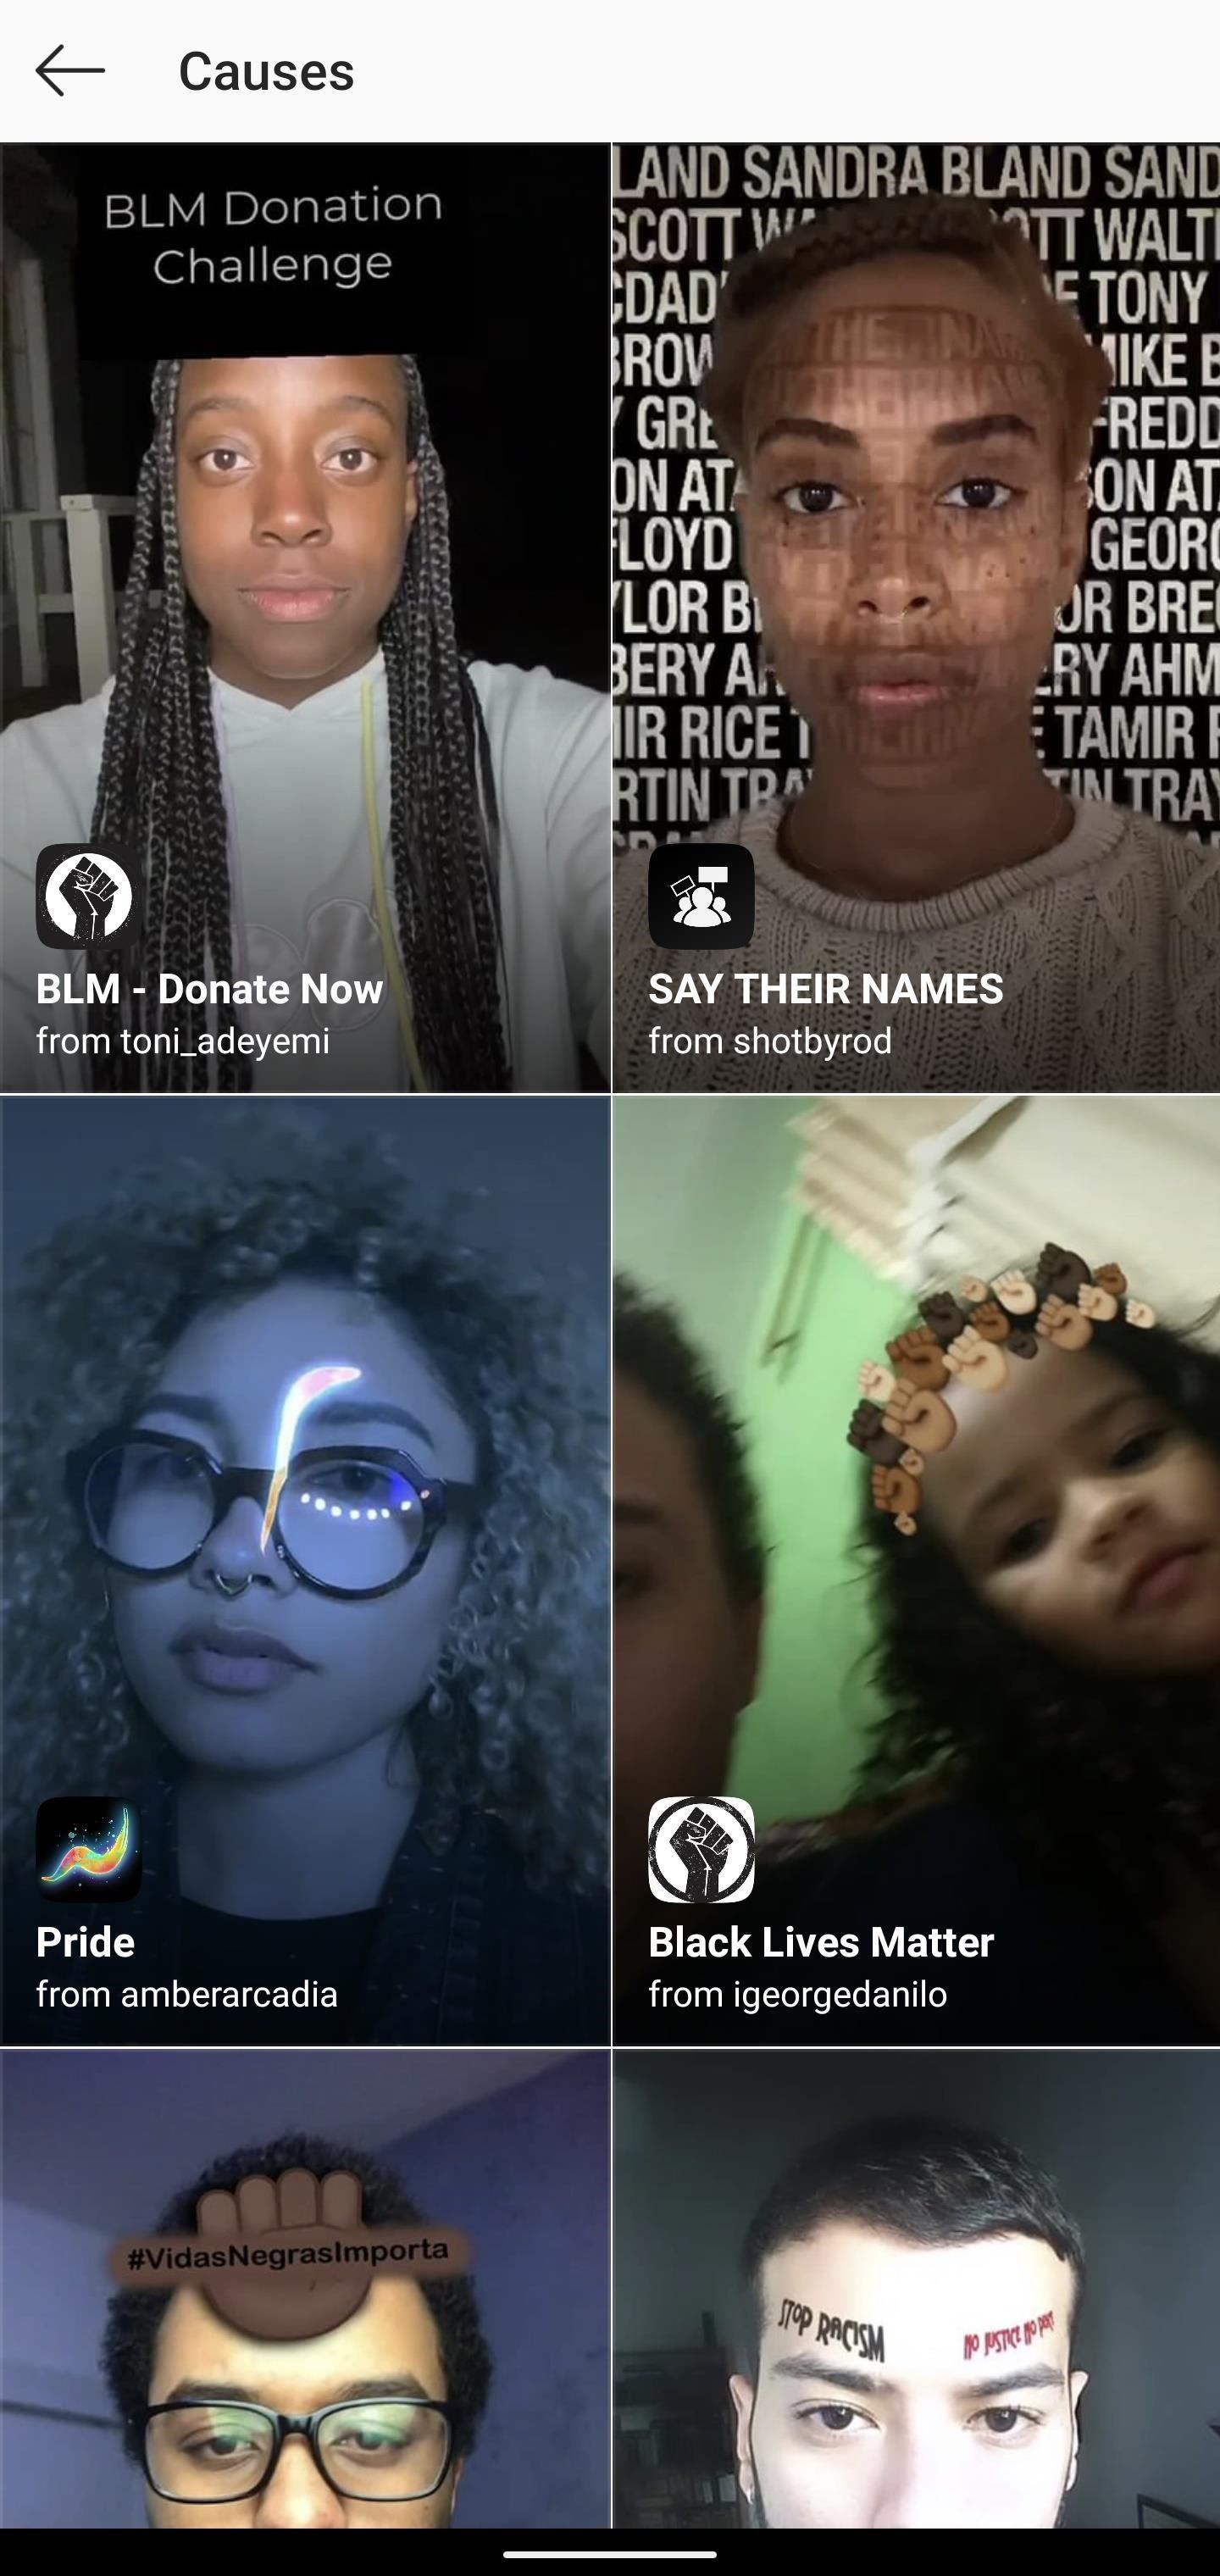 Show Your Support for Social Causes with AR Lenses from Snapchat, Instagram & More